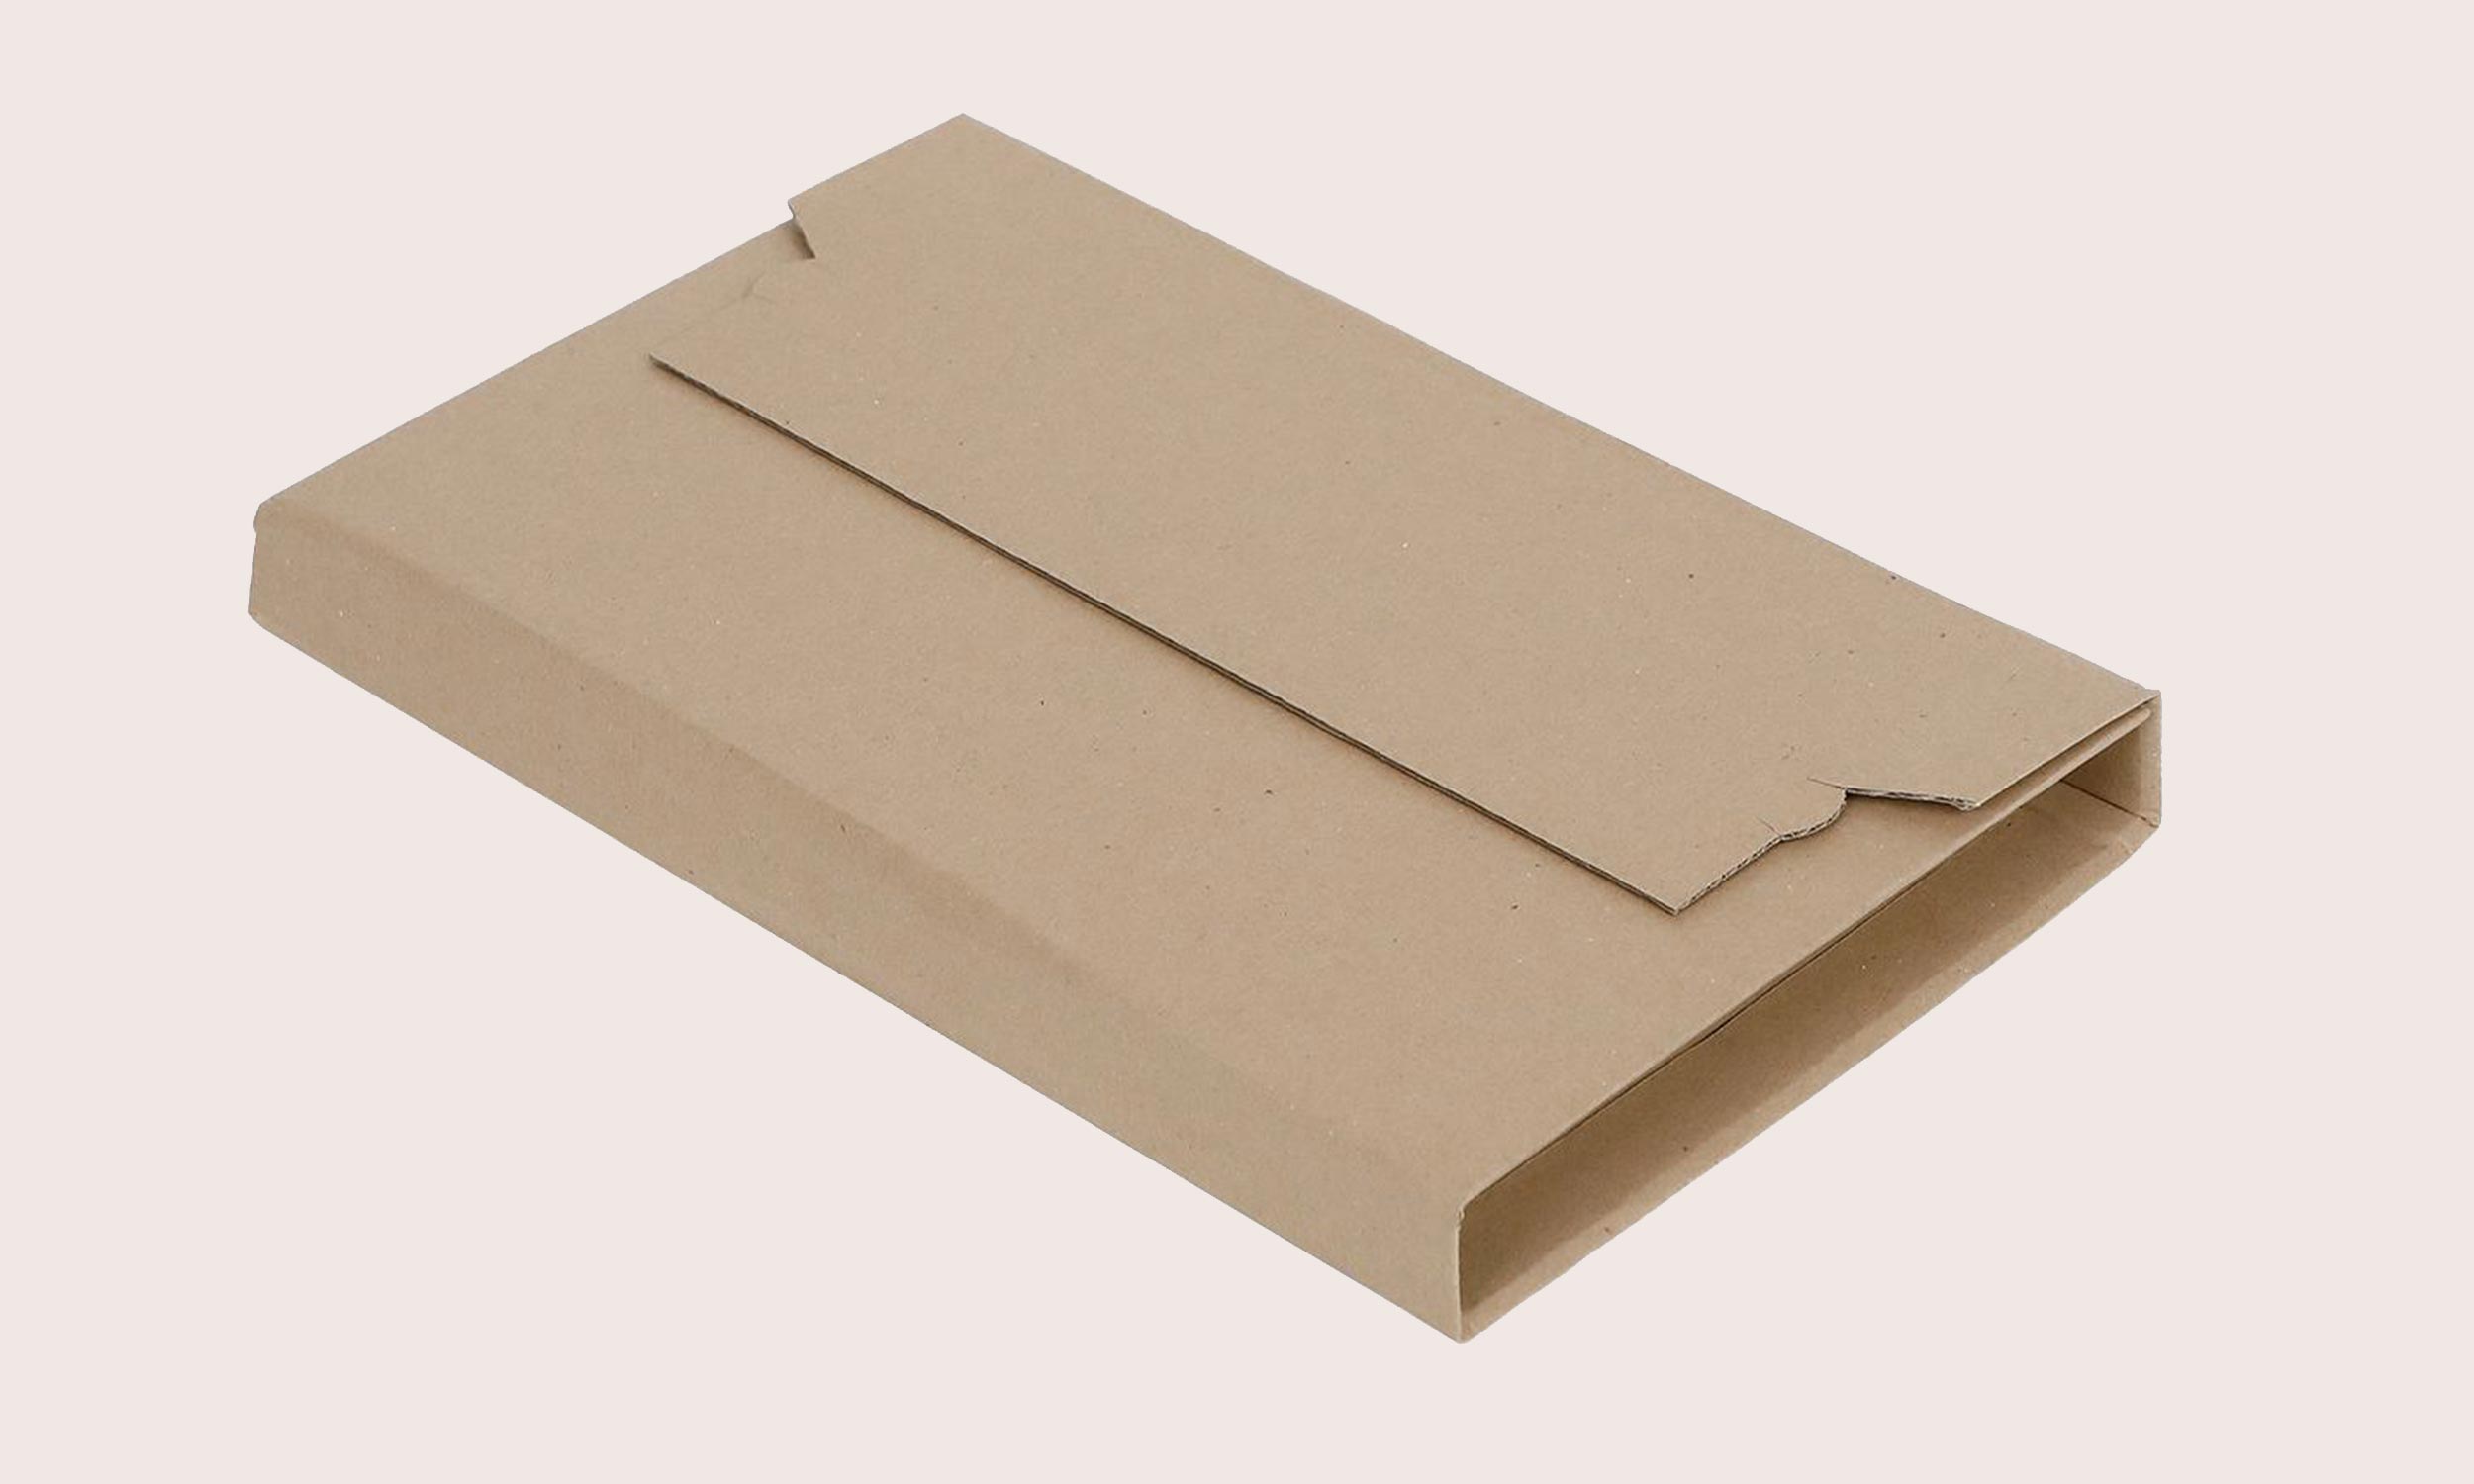 Buy book packaging from the manufacturer